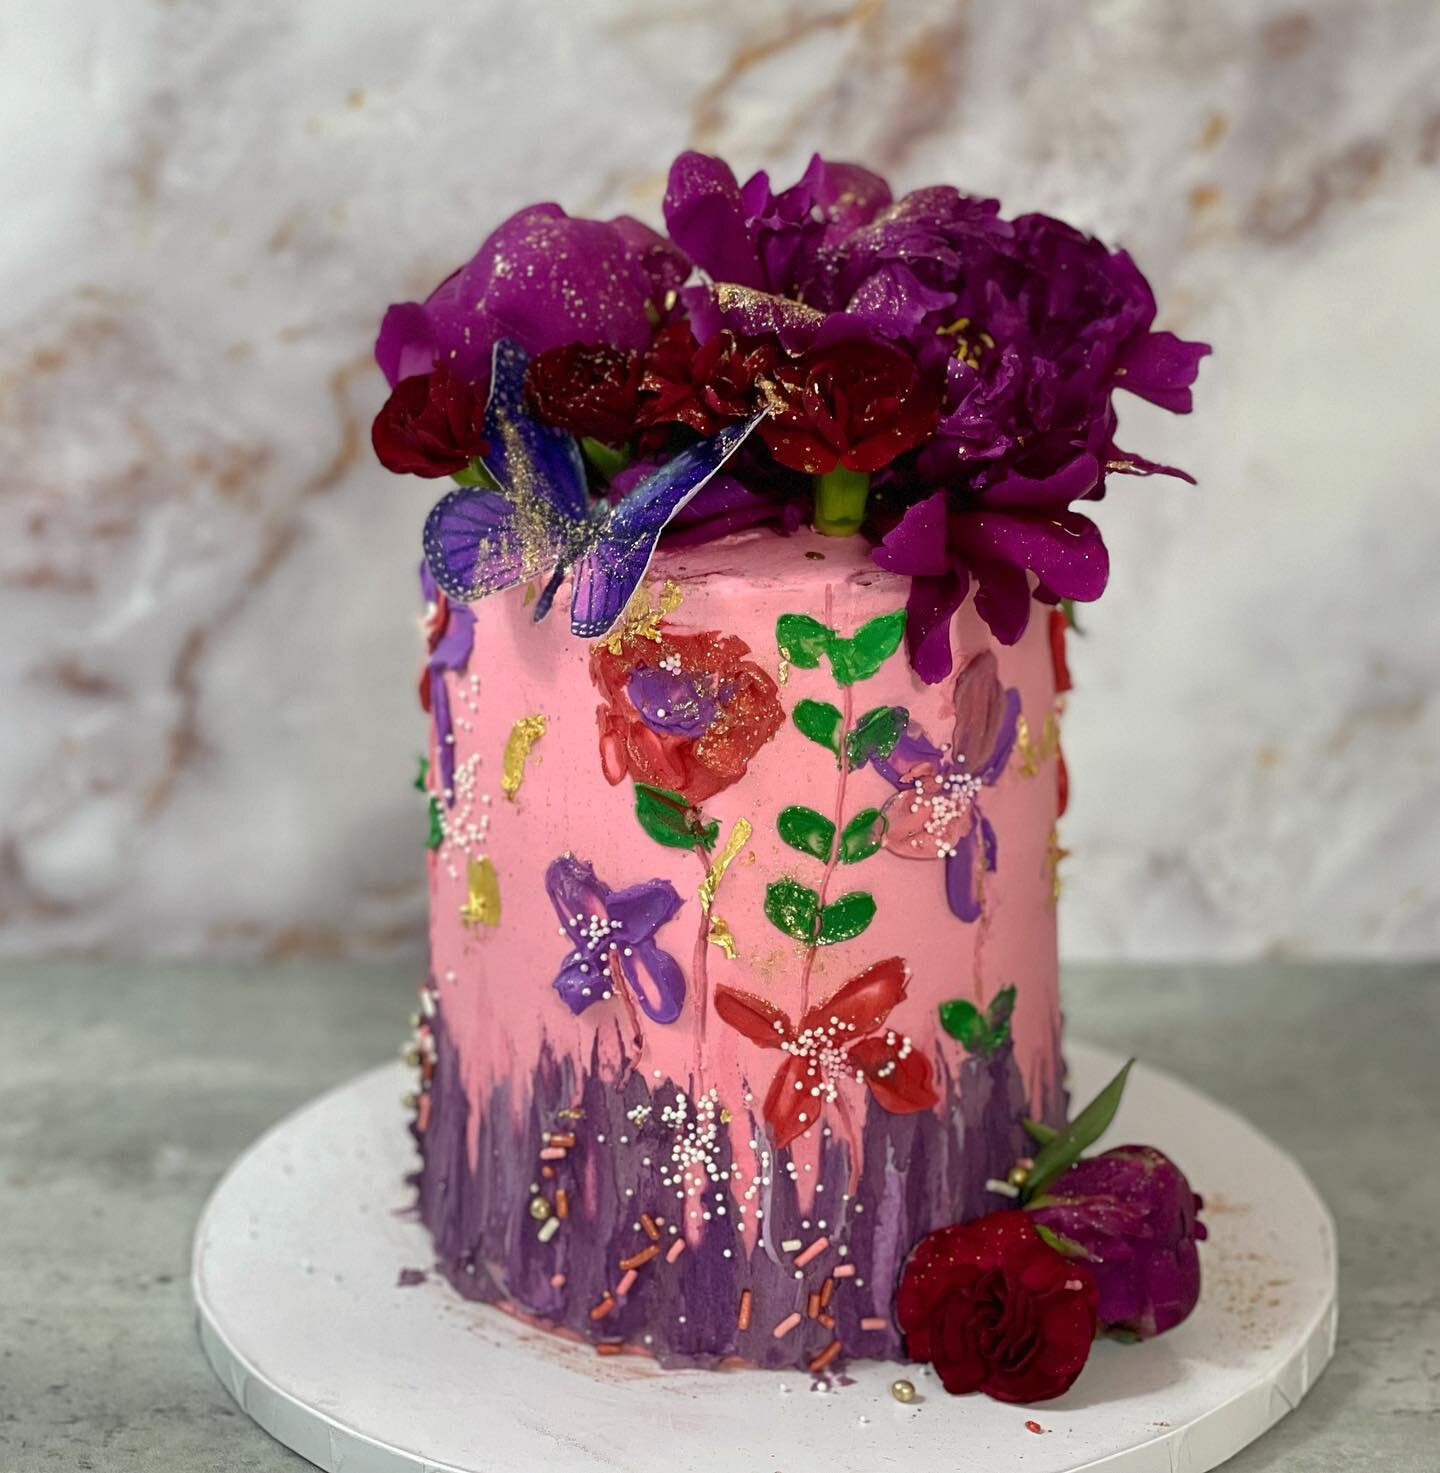 Palette knife techniques are my favorite designs on cakes, you&rsquo;ll see me practicing this technique more and more this year and I&rsquo;m hoping to master it soon enough. There&rsquo;s so much that goes into it, but the results are beautiful! It